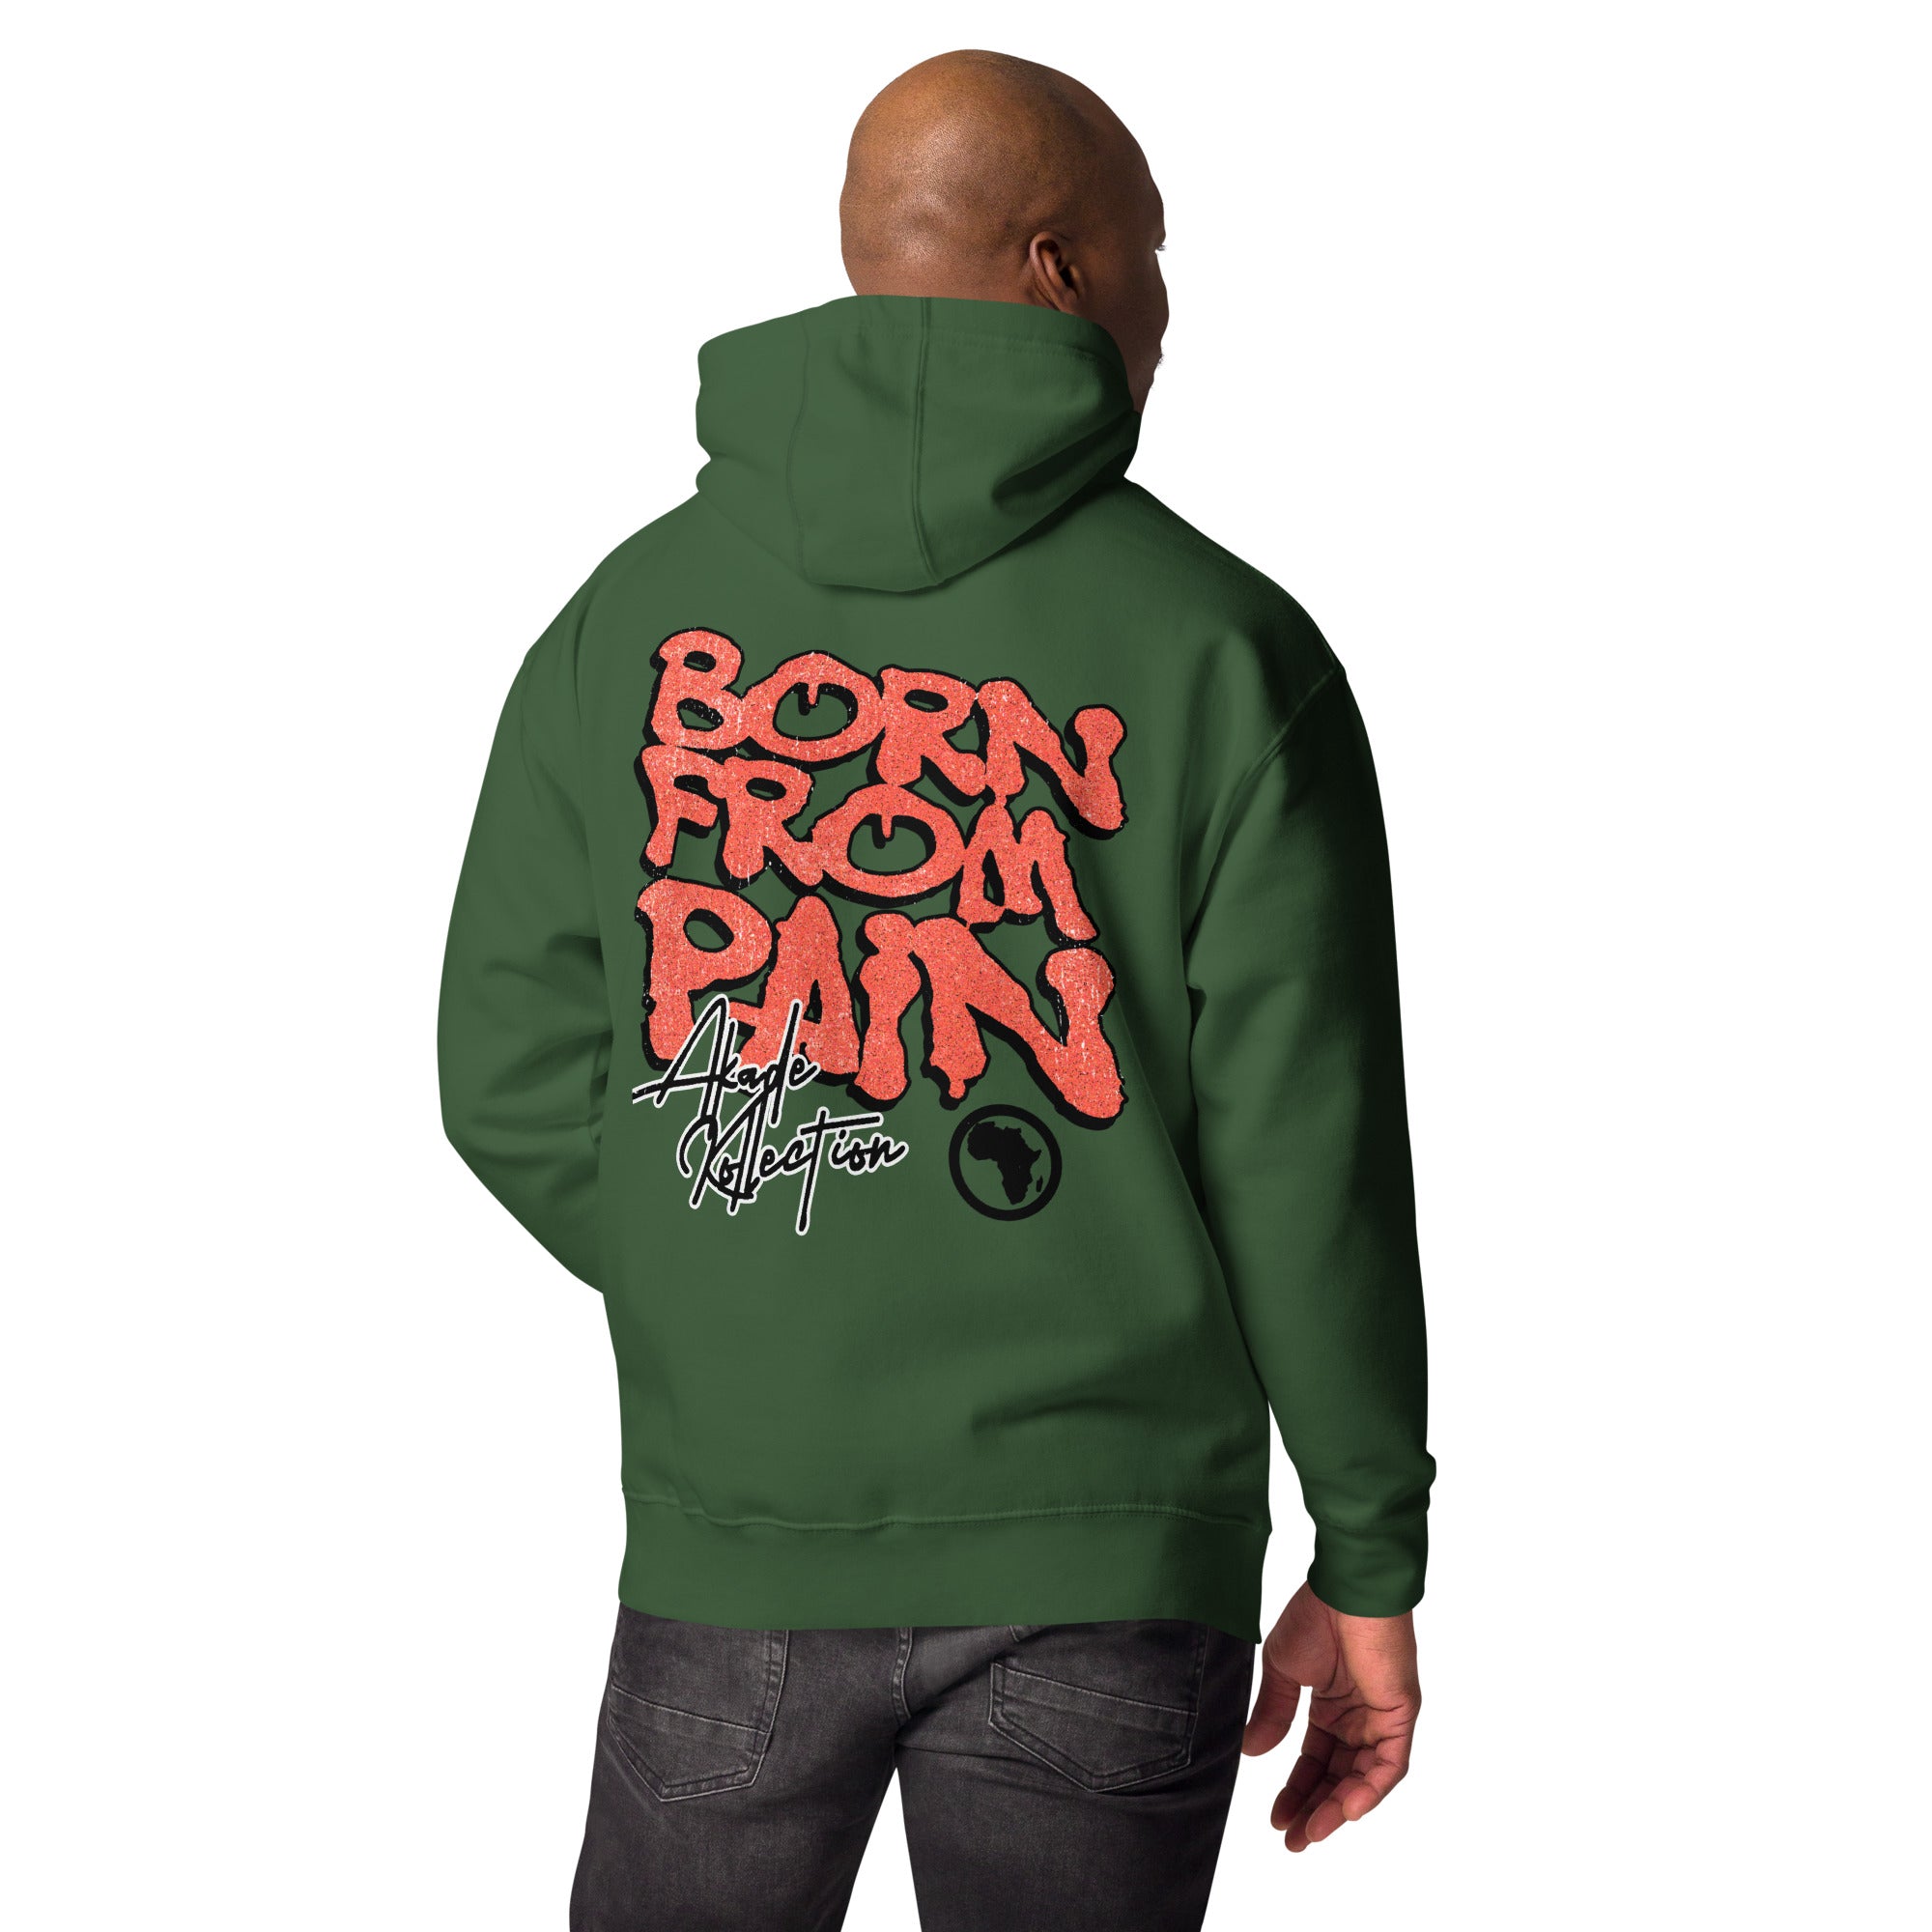 MEN'S BORN FROM PAIN HOODIE